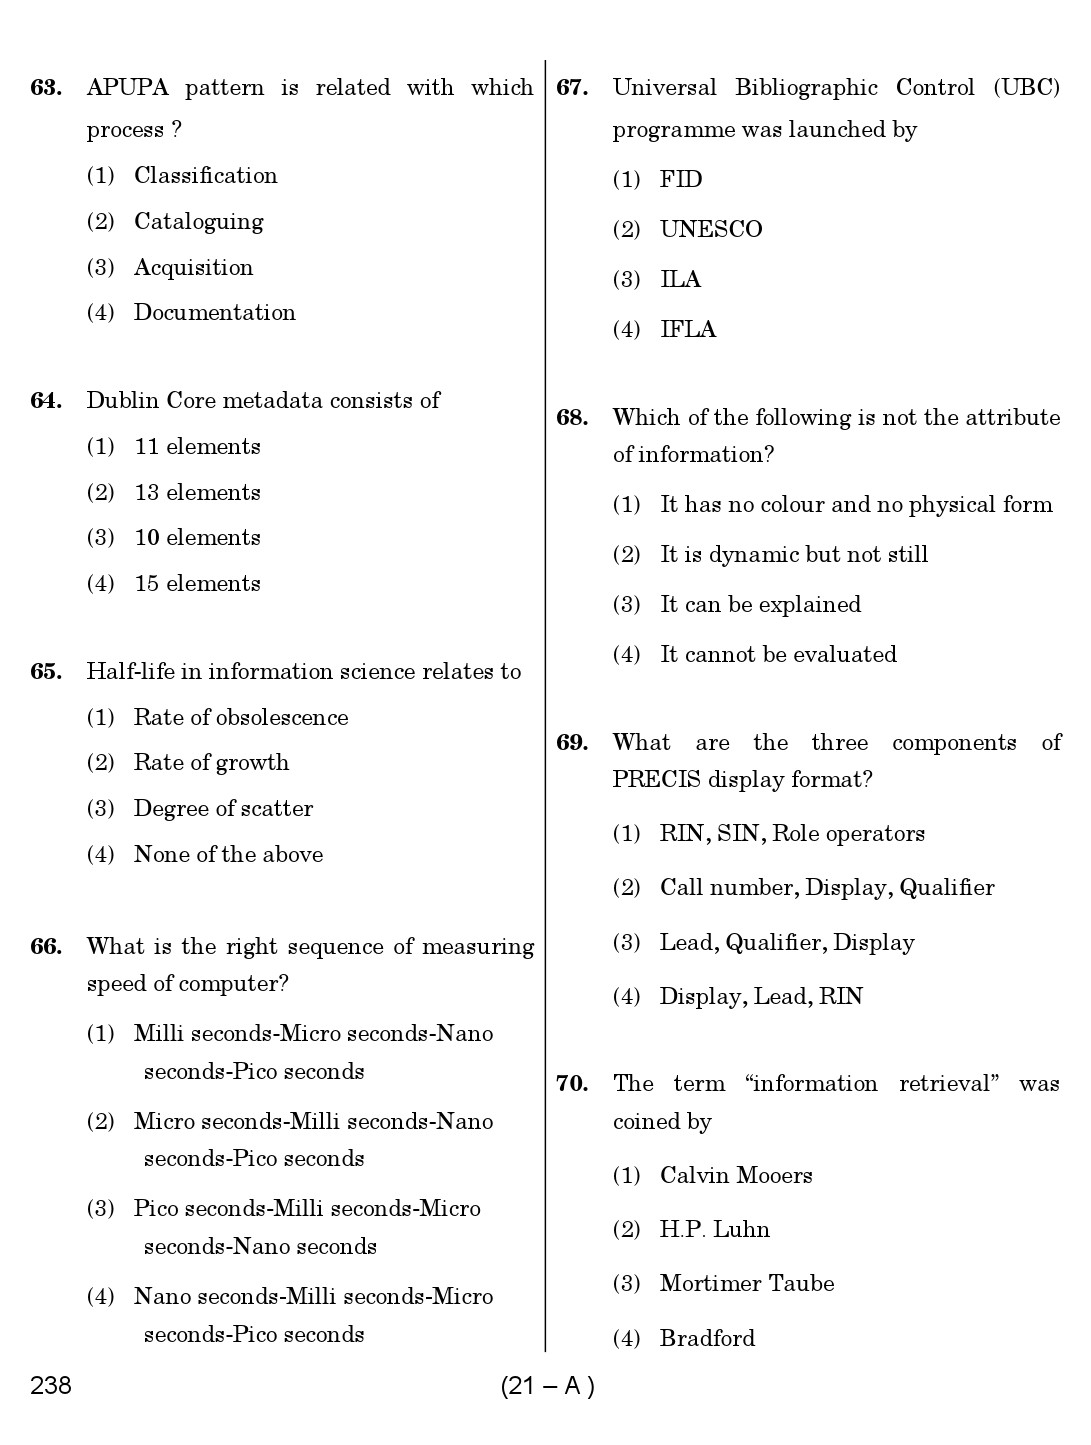 Karnataka PSC 238 Specific Paper II Librarian Exam Sample Question Paper 21